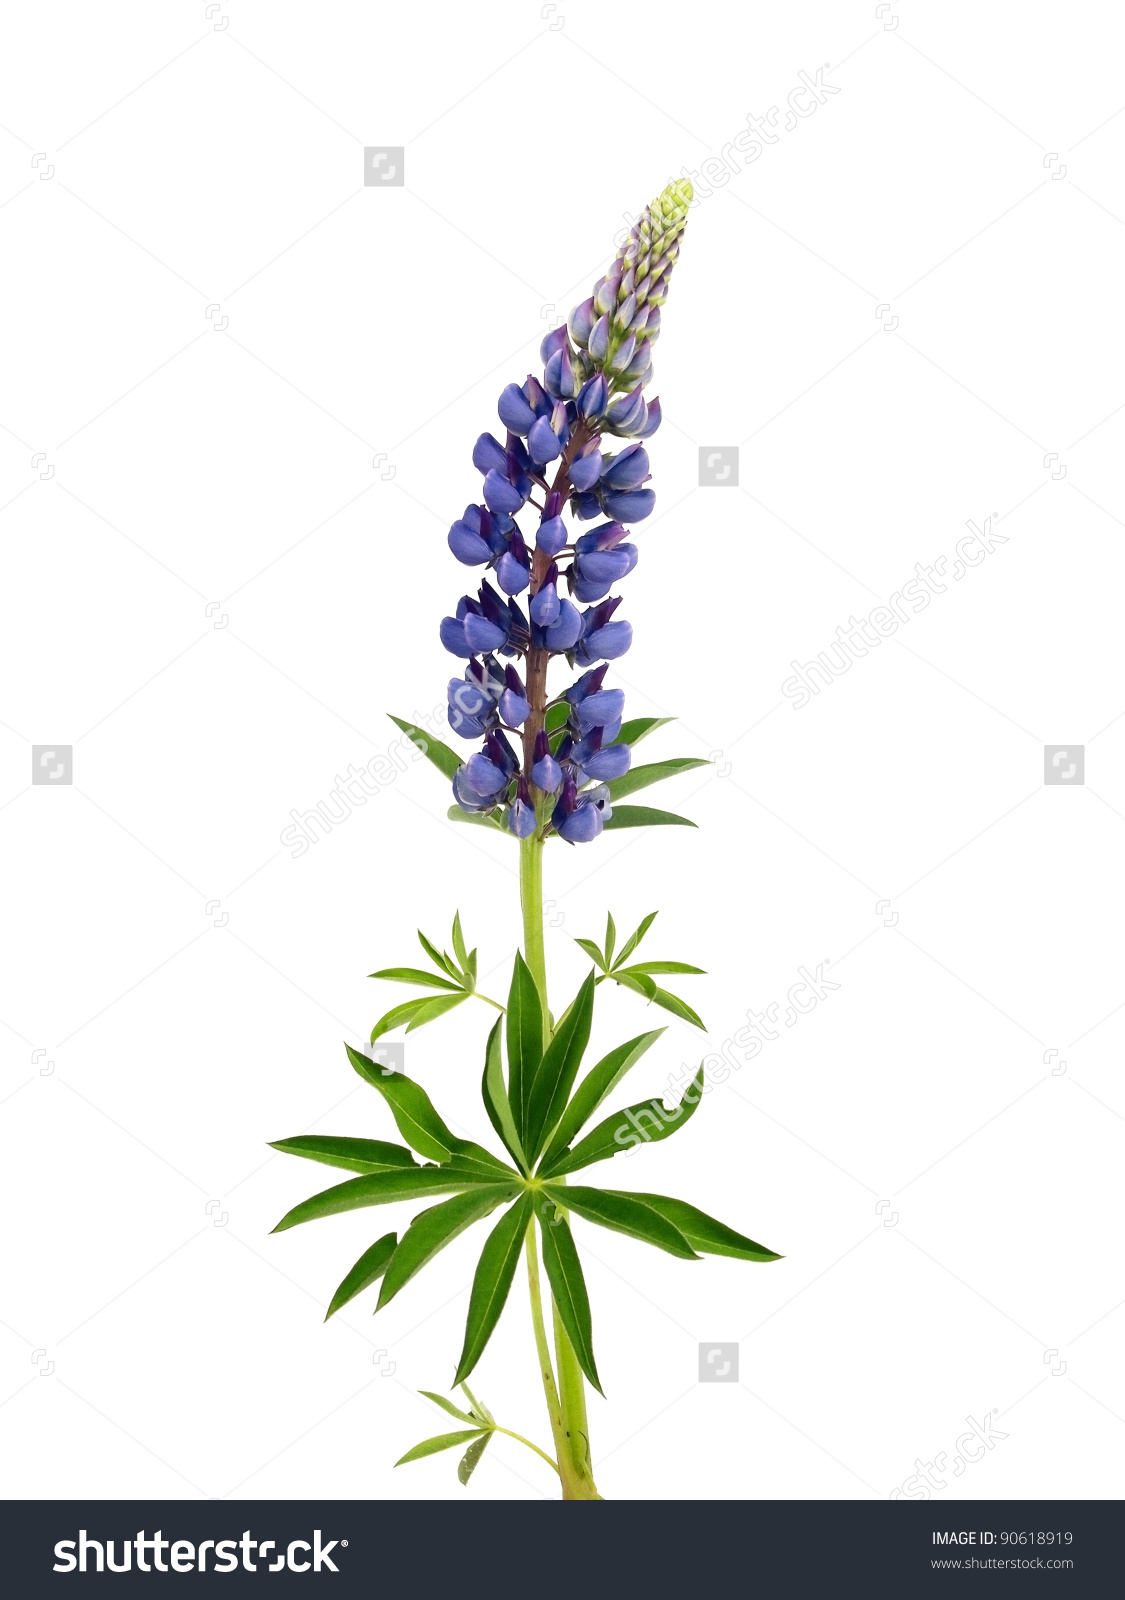 Lupine clipart #7, Download drawings